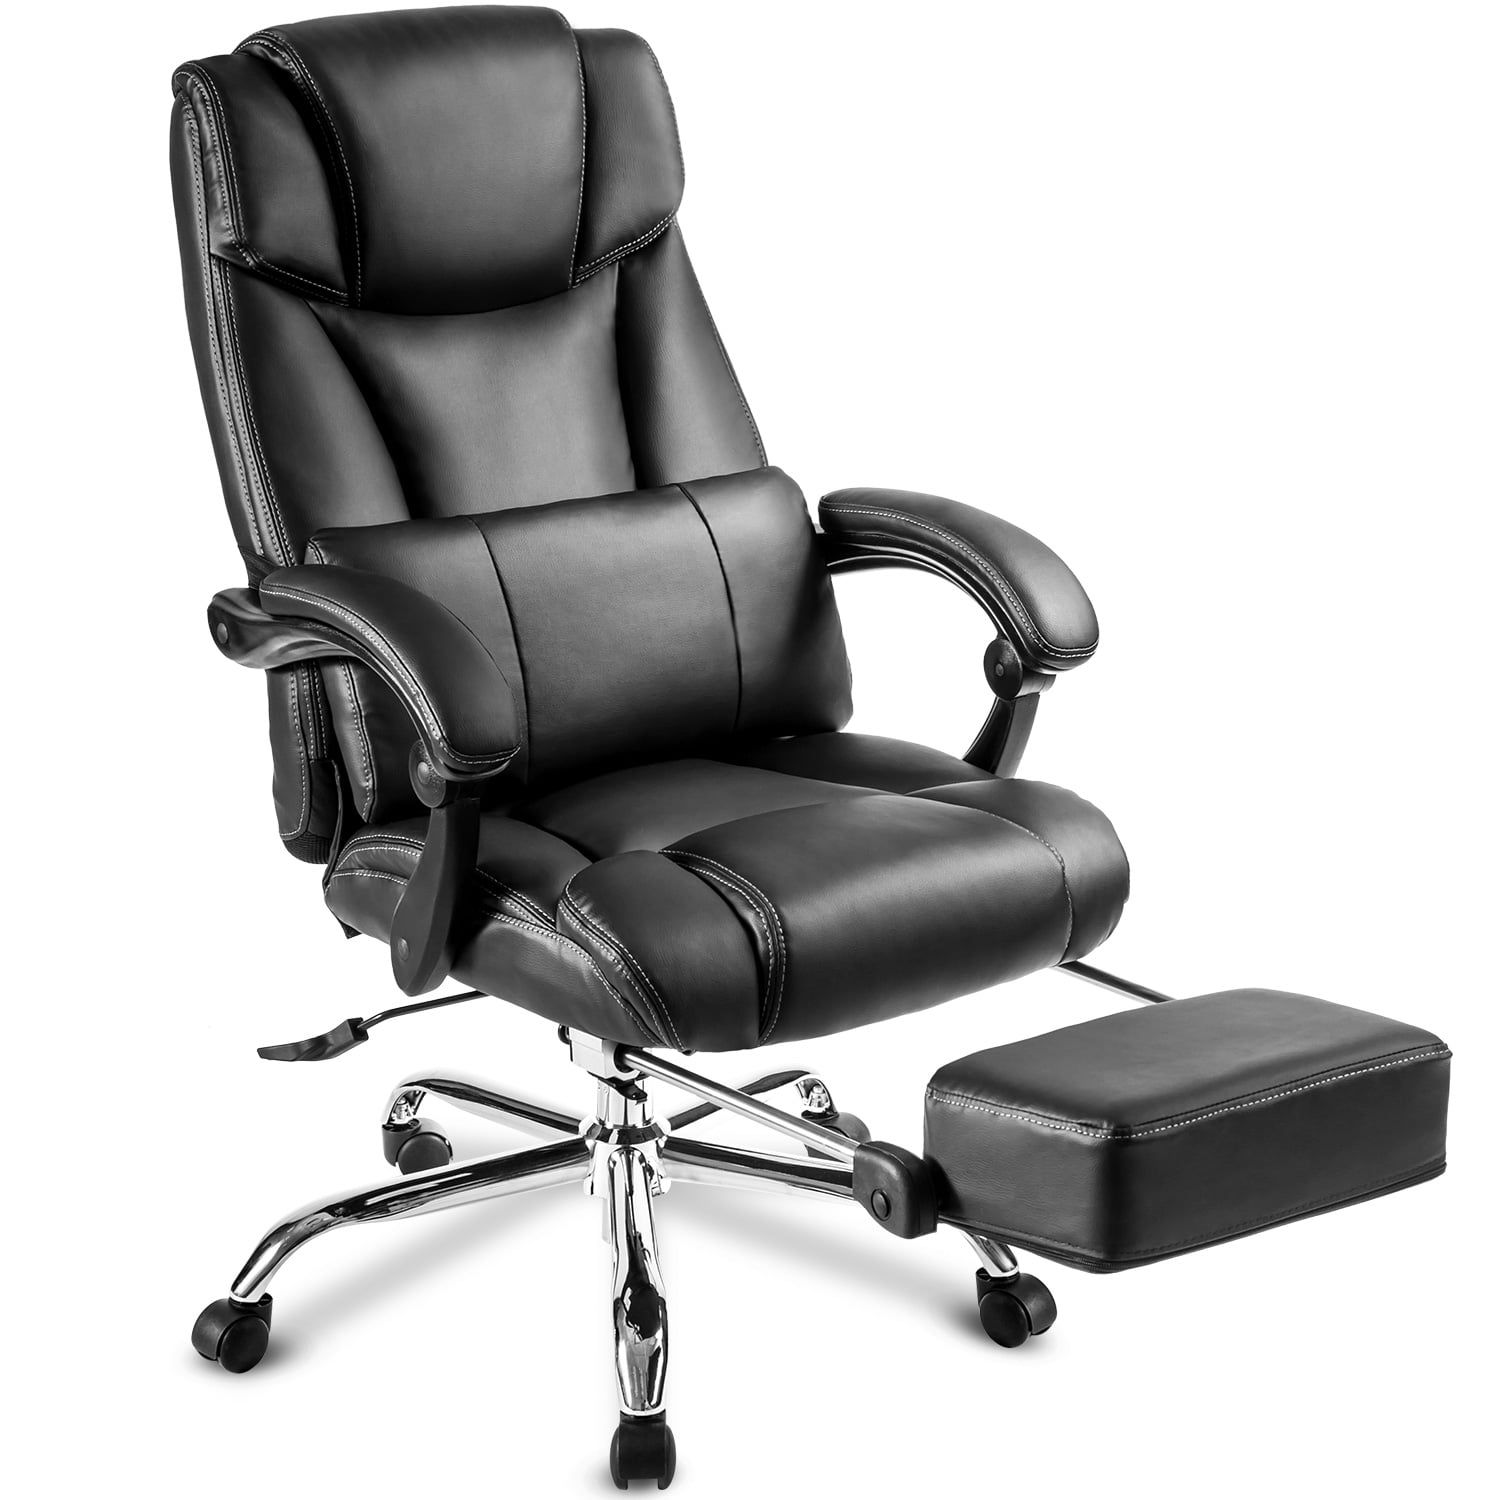 Executive Adjustable  Genuine Bonded Leather Black Gaming Reclining Office Chair 